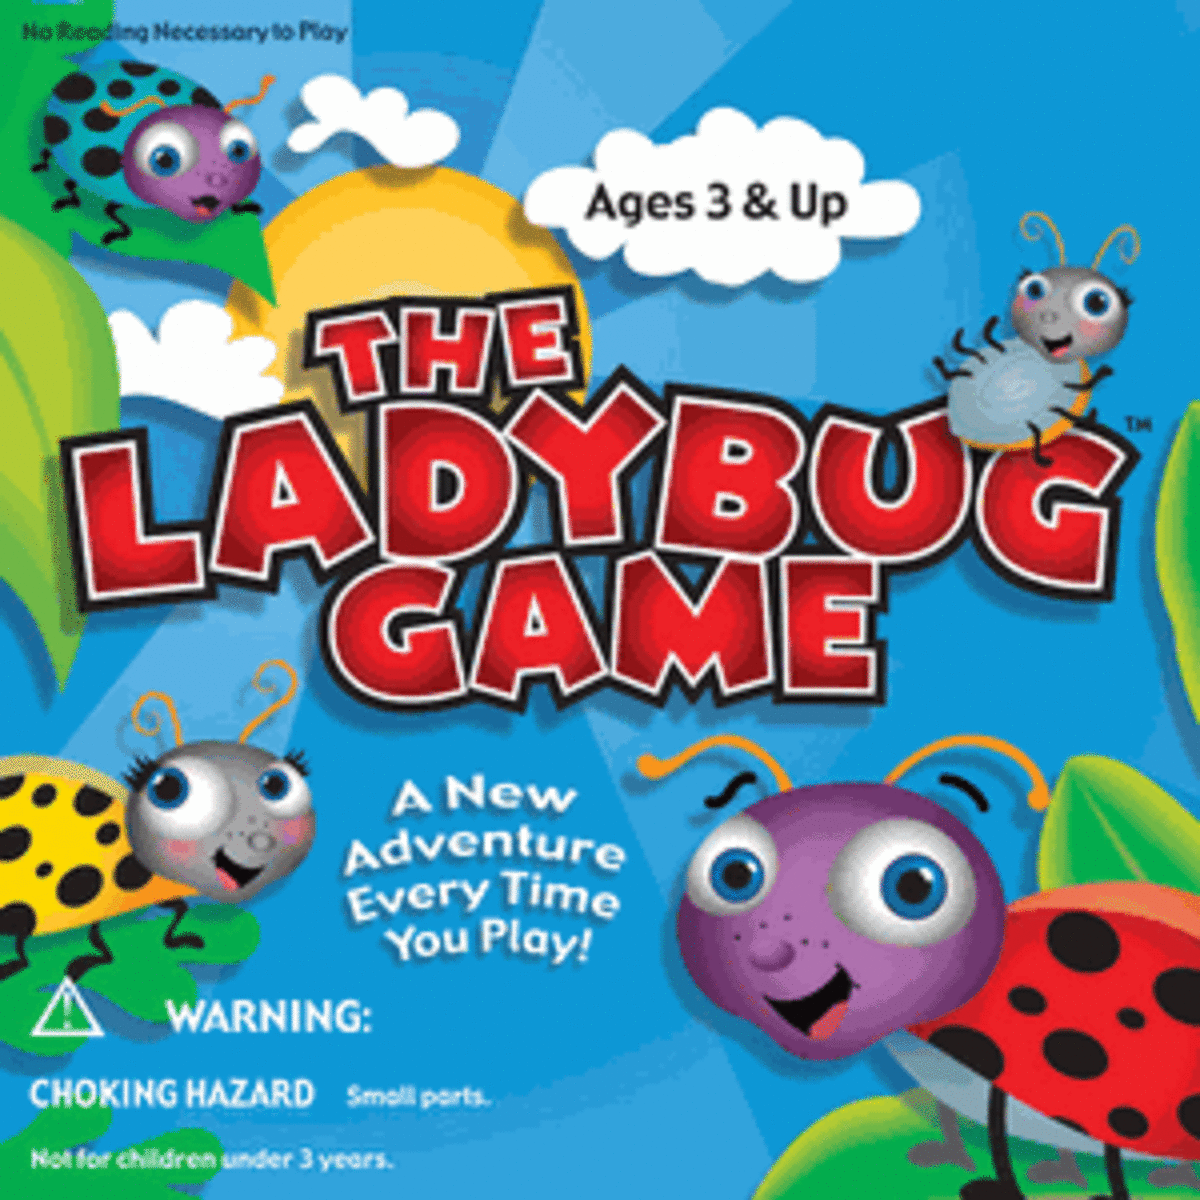 The Ladybug Game: Instructions for Playing This Great Game for Preschoolers